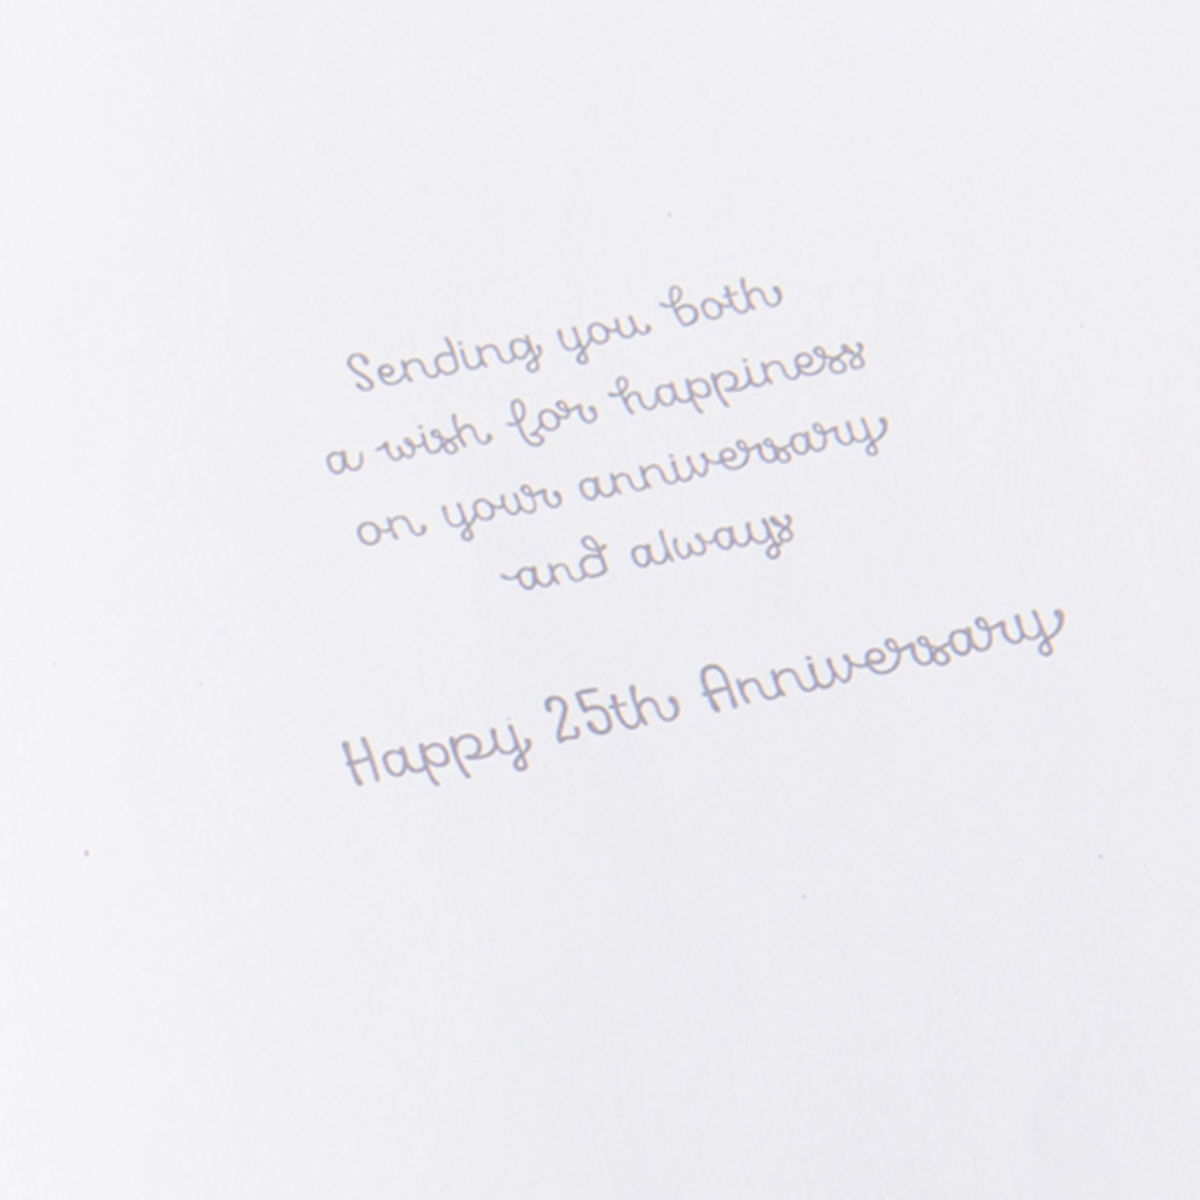 Exquisite Collection 25th Anniversary Card - Silver Wedding